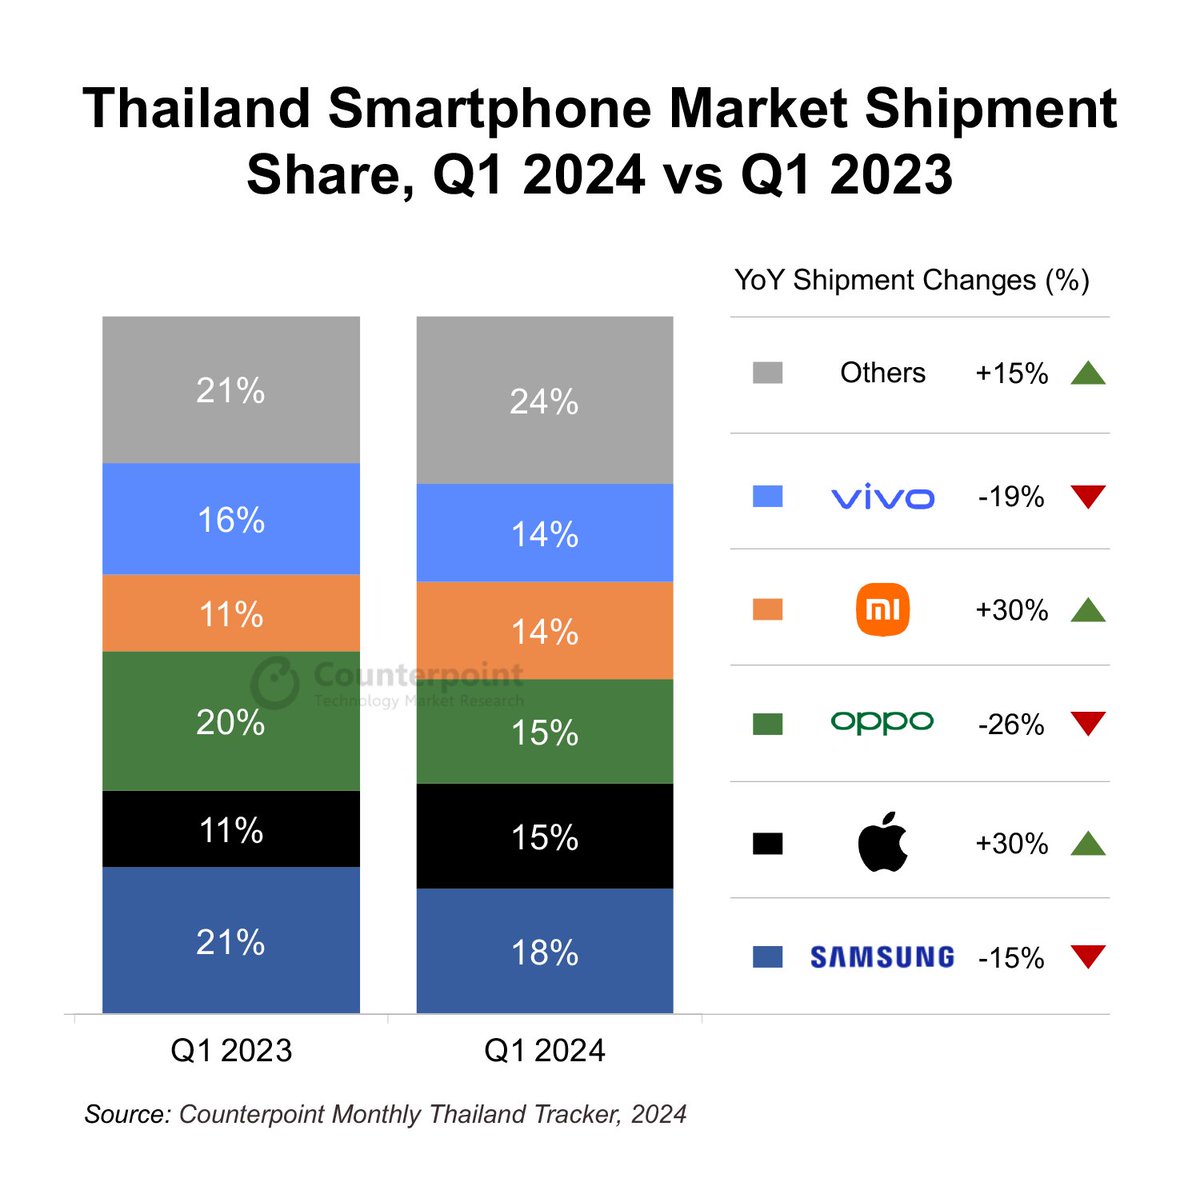 Just published: Thailand’s 5G Smartphone Shipment Share Exceeds 50% for First Time in Q1 2024 Key takeaways: - Thailand’s overall smartphone shipments fell 2% YoY in Q1 2024 due to slow economic recovery. - 5G smartphone shipment share reaches 52% in Q1 2024, helped by a 19% YoY